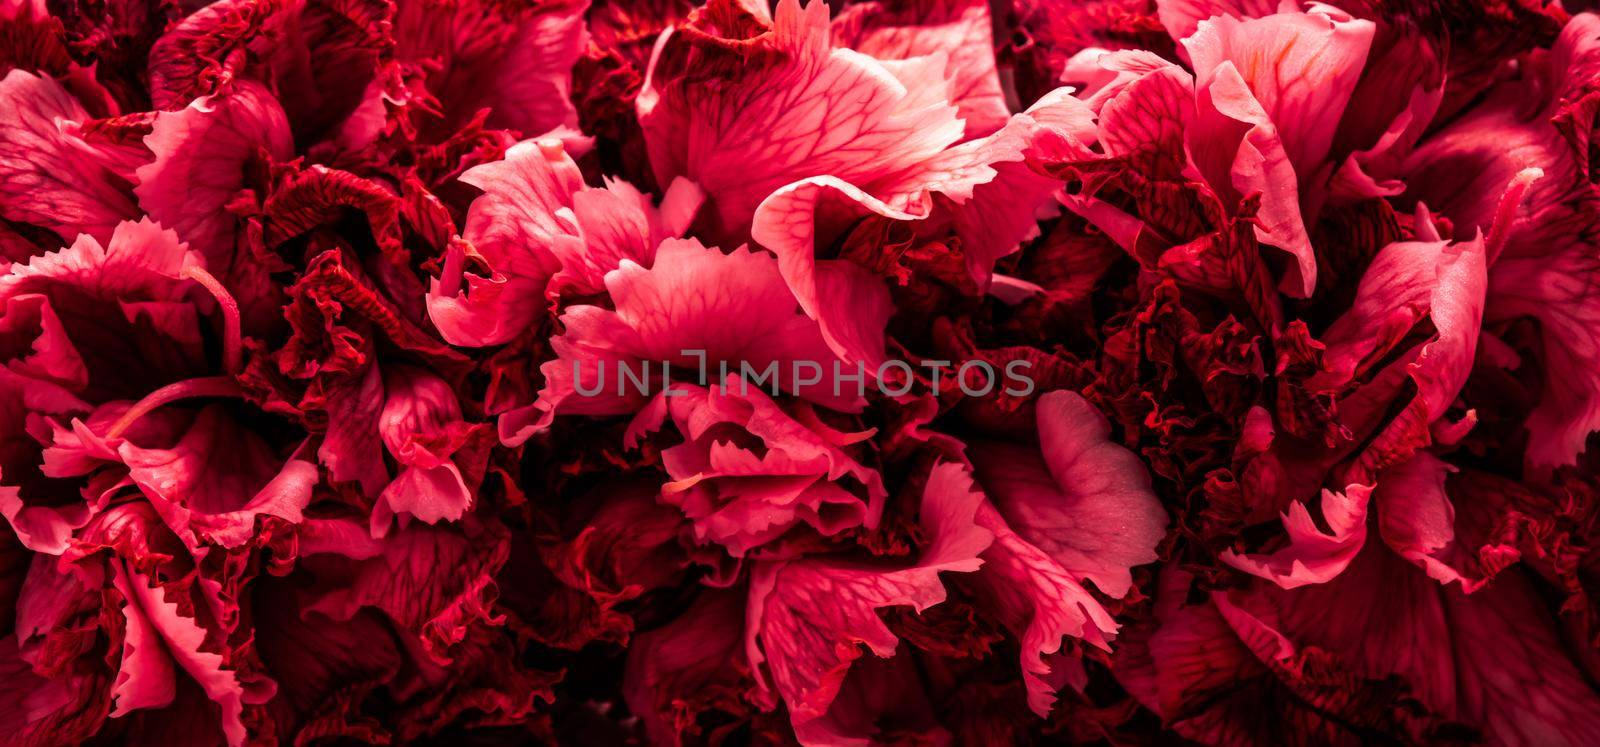 Abstract floral background, red carnation flower petals. Macro flowers backdrop for holiday brand design by Olayola